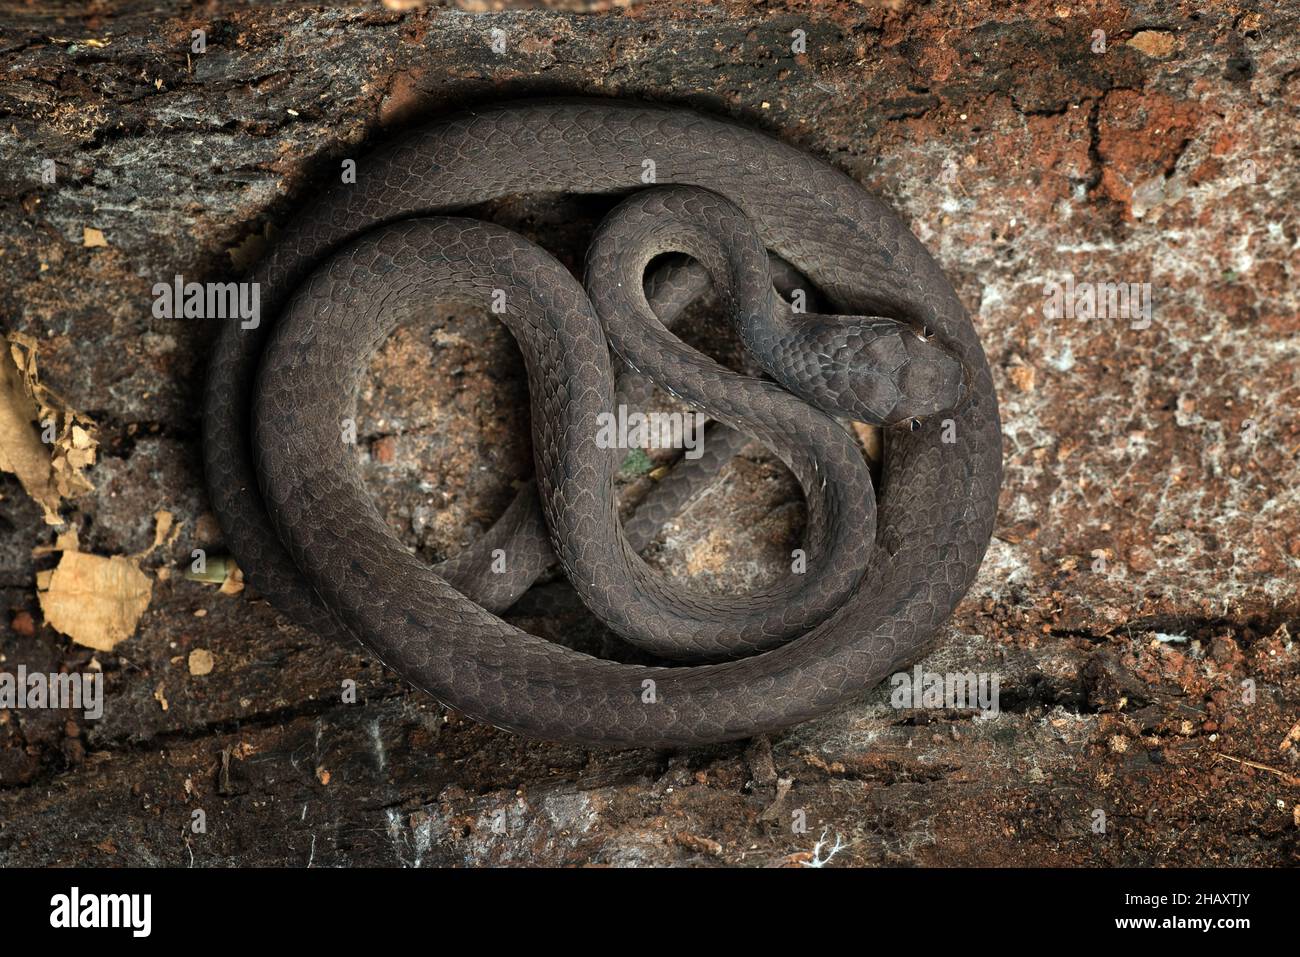 Slug eater snake coiled inside an old tree trunk, Indonesia Stock Photo